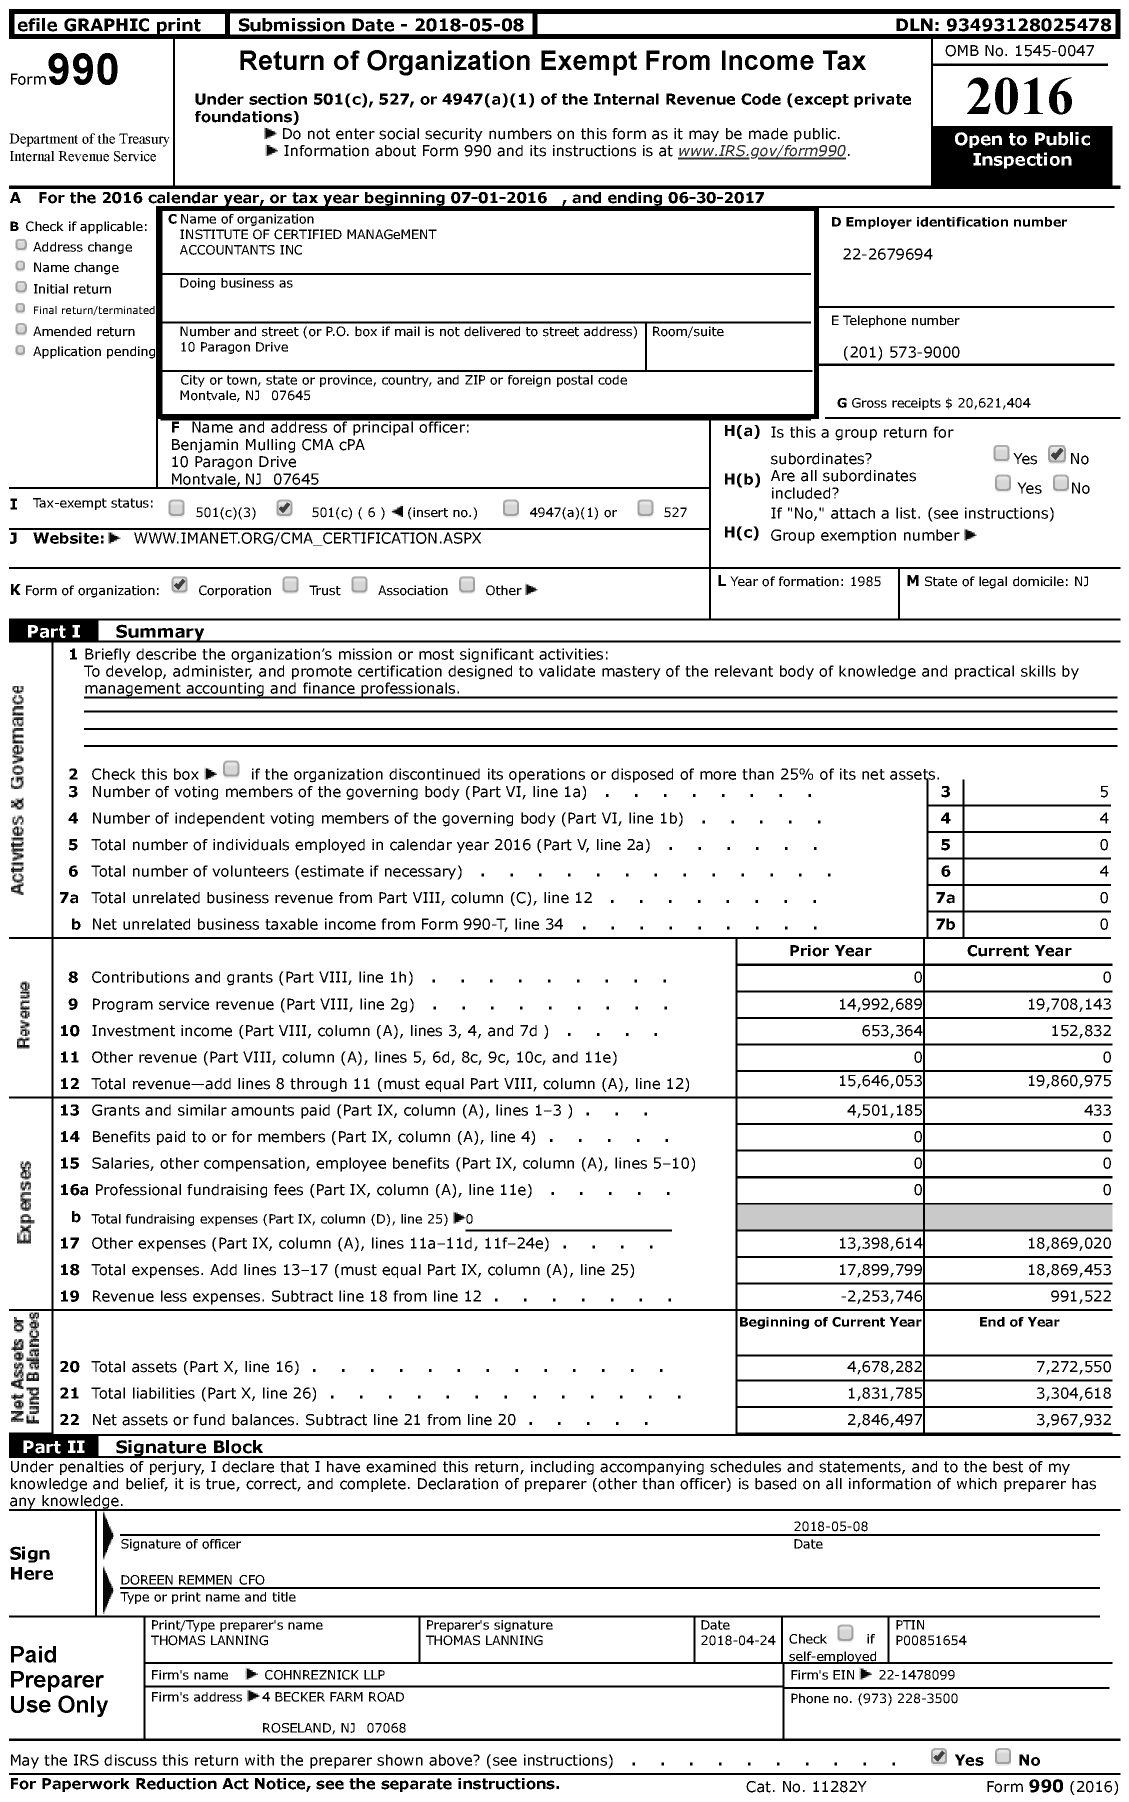 Image of first page of 2016 Form 990 for Institute of Certified MANAGeMENT ACCOUNTANTS (IMA)